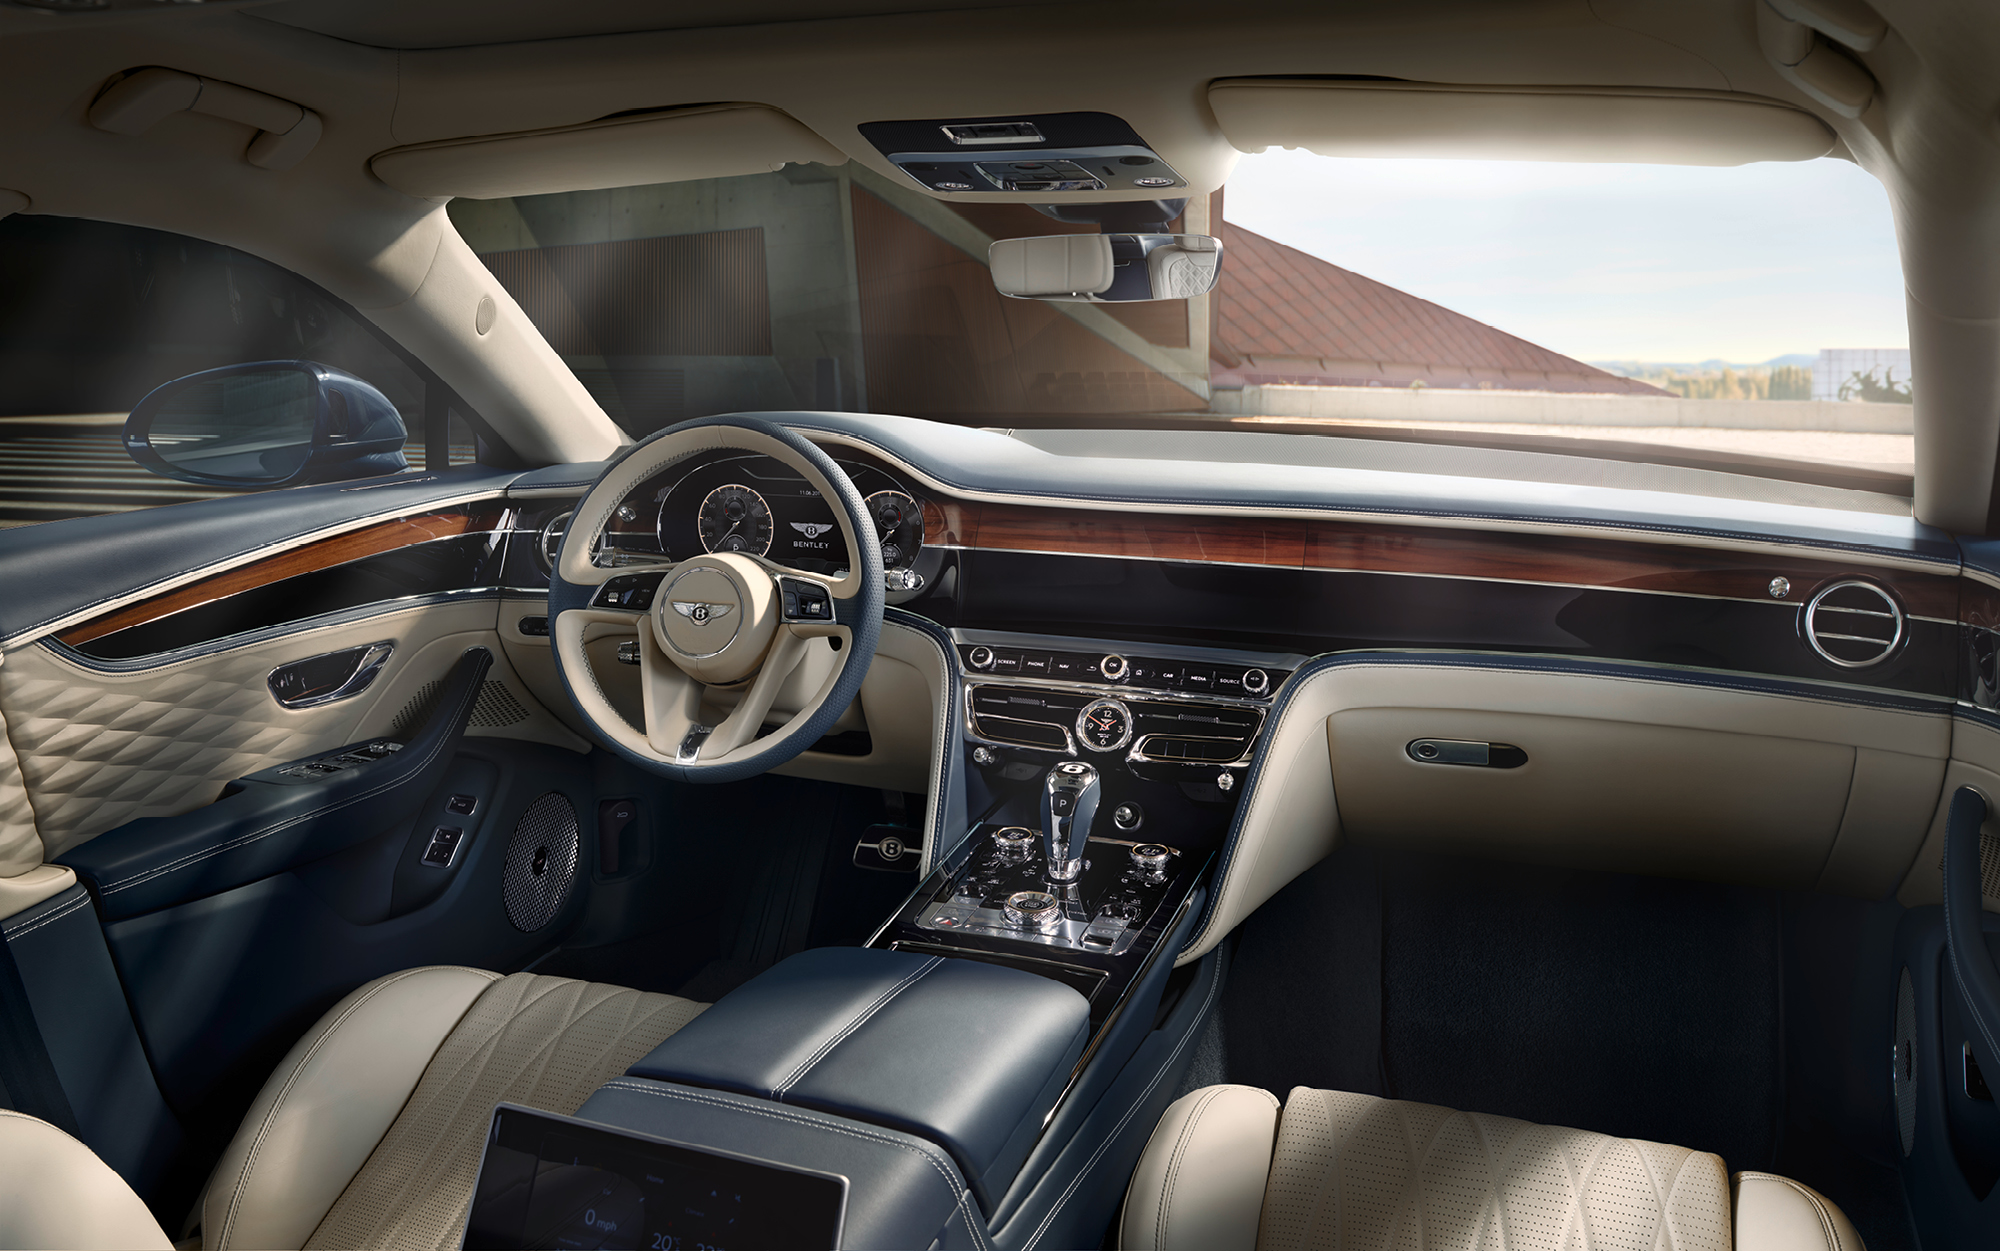 The Bently Flying Spur has all the hallmarks of the luxury marques's sumptuous finishes while harnessing innovative technology and unrivalled power